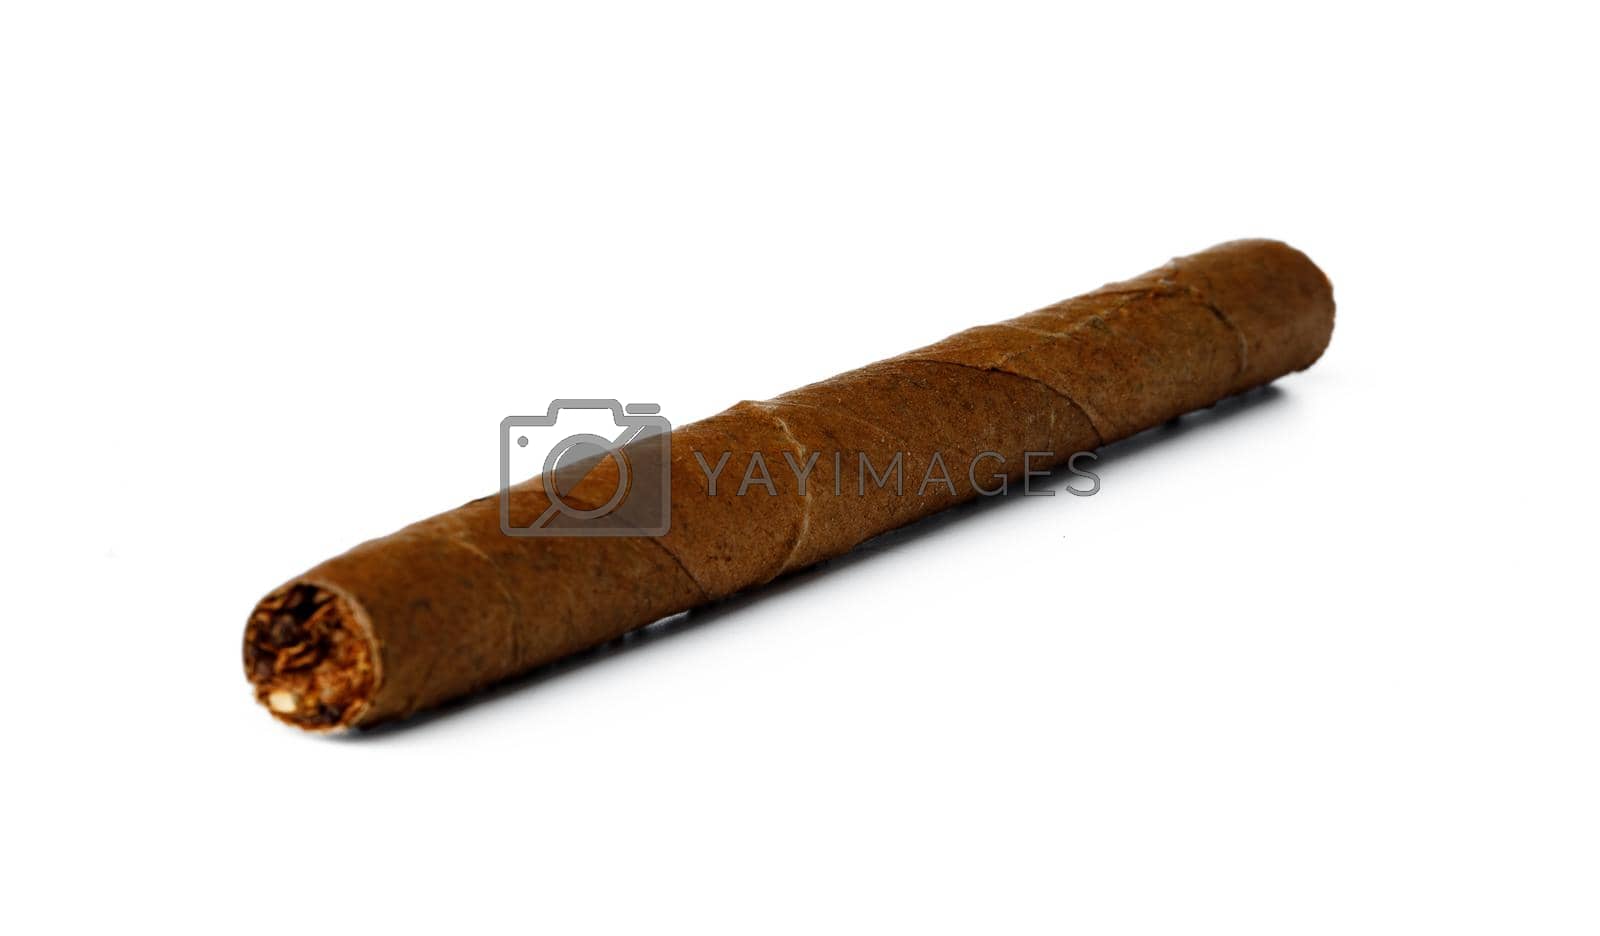 Royalty free image of One hand rolled cigar isolated on white by Fabrikasimf